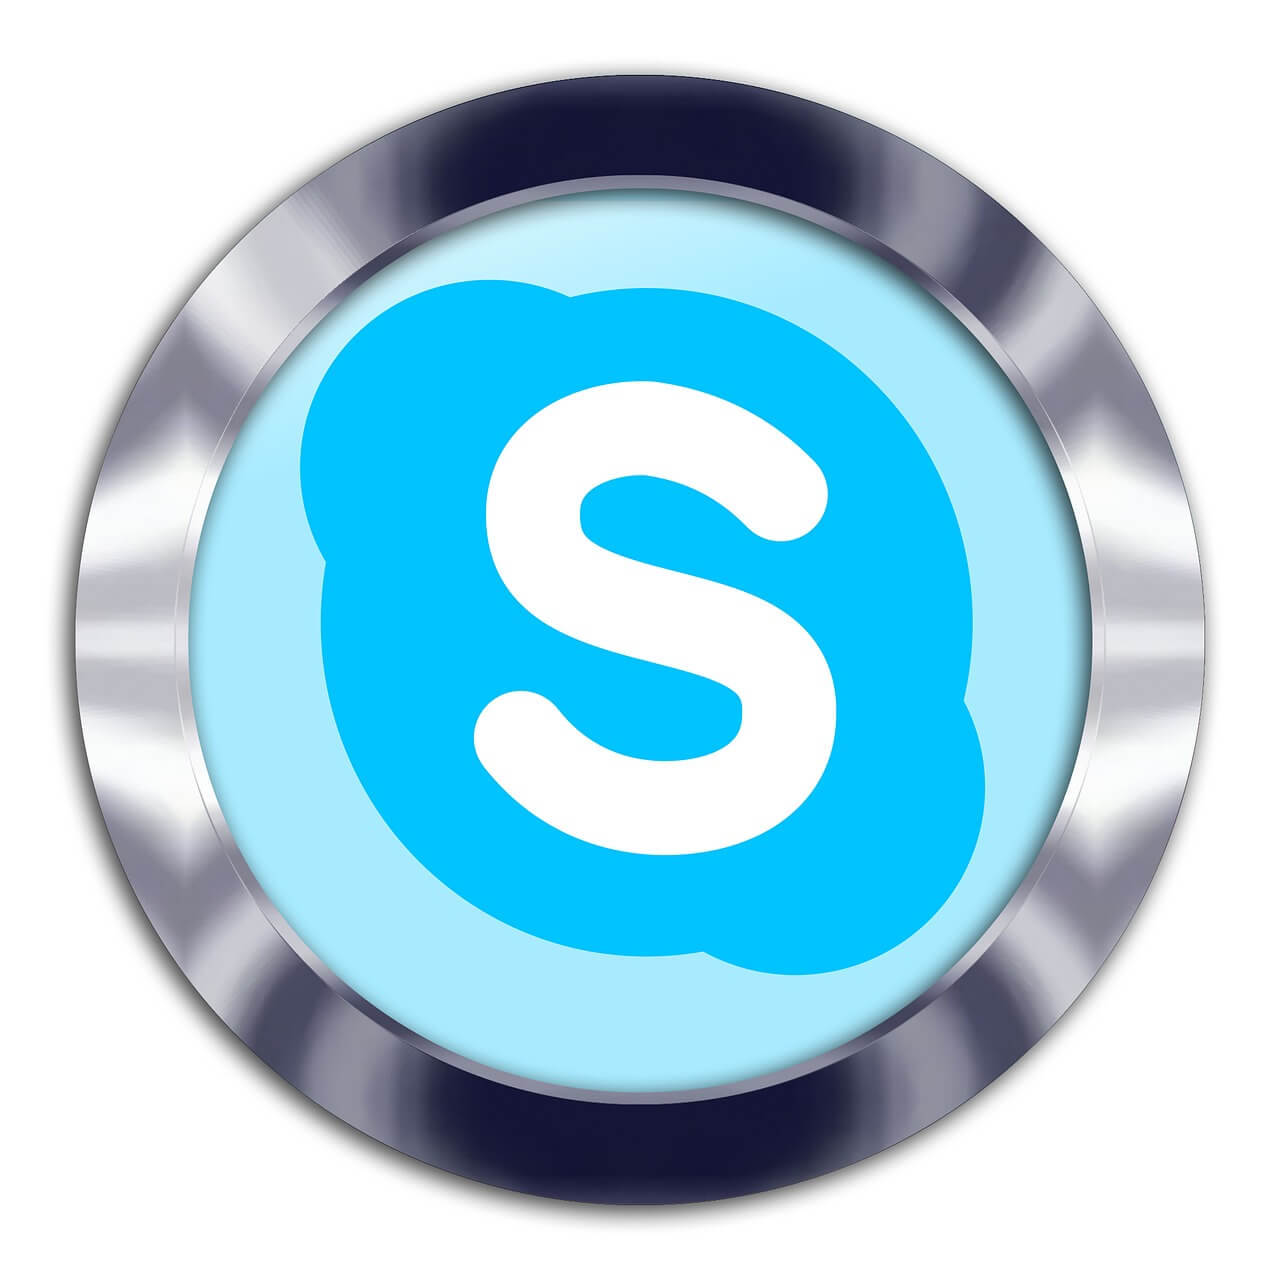 skype id for chat